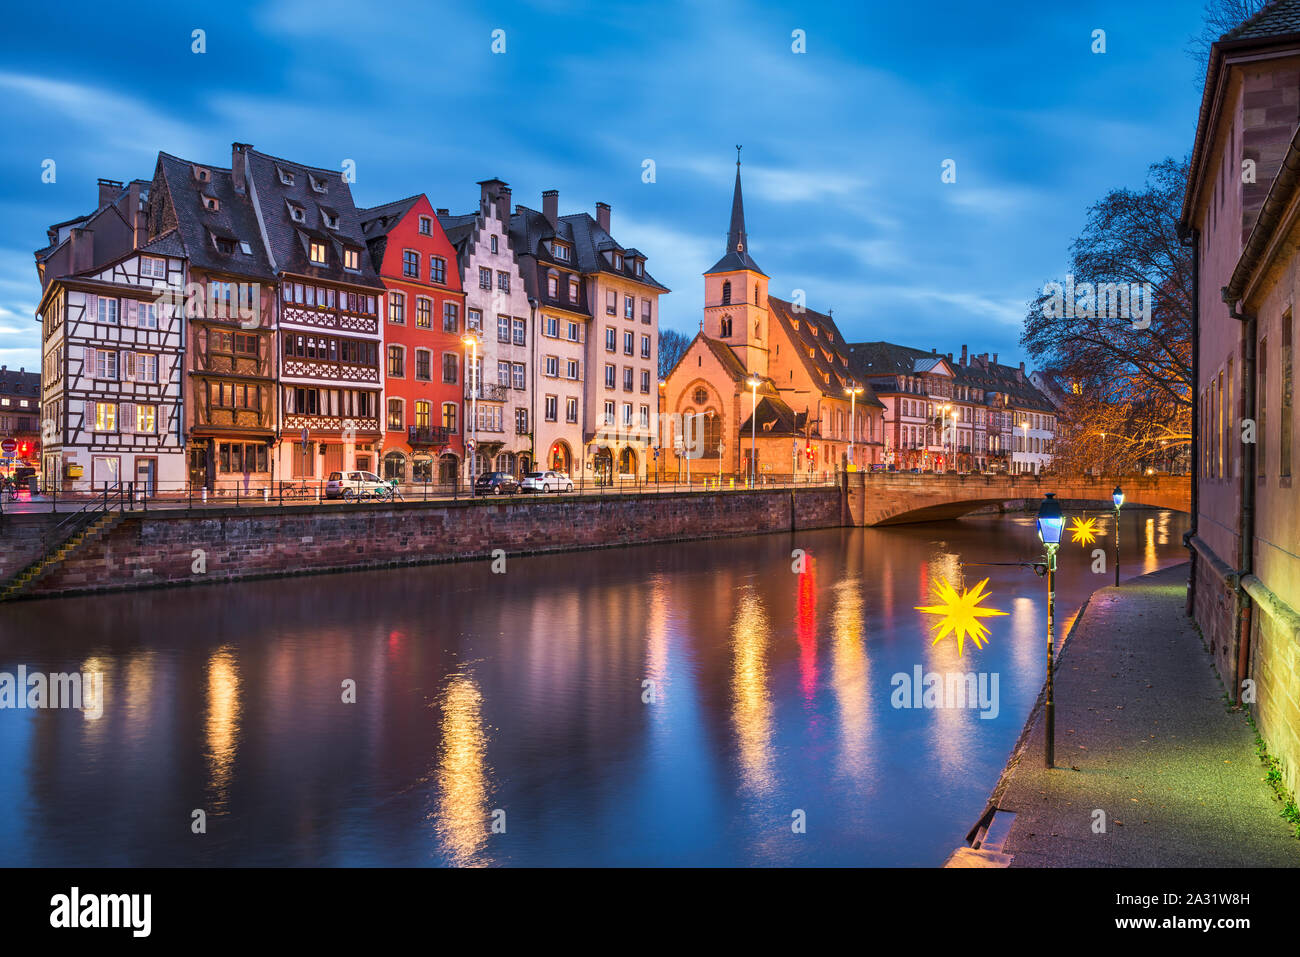 Old town of Strasbourg, France with Christmas decorations Stock Photo